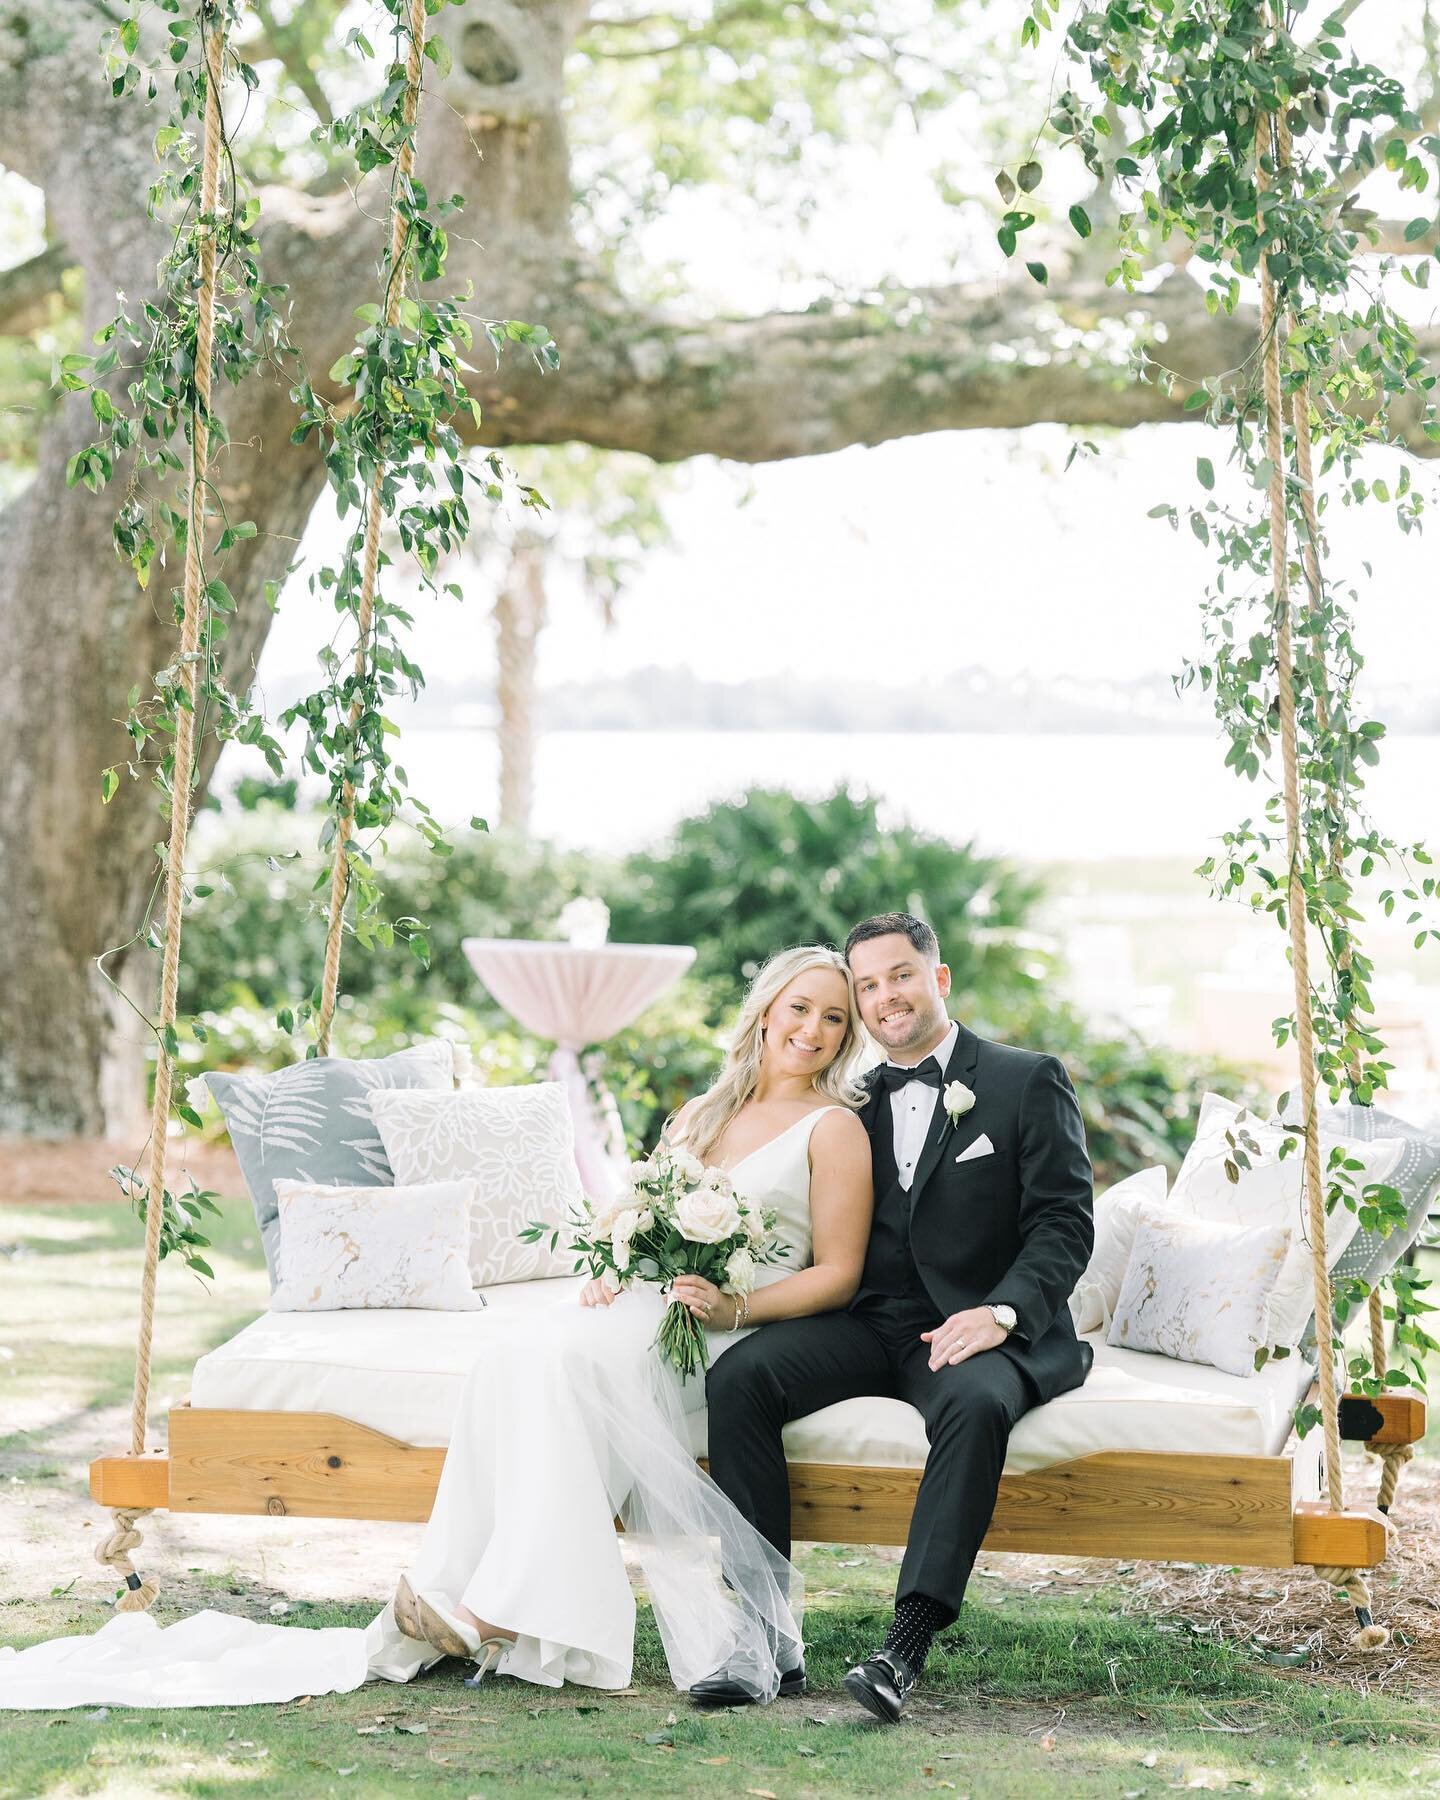 Alyse &amp; Jacob&rsquo;s wedding day was absolutely dreamy!

Special thanks to all of our amazing wedding team:

Photographer:&nbsp;@aaronandjillian
Planner, Florals, Lighting &amp; Bed Swing:&nbsp;@charlestonweddingstudio
Venue: Lowndes Grove&nbsp;